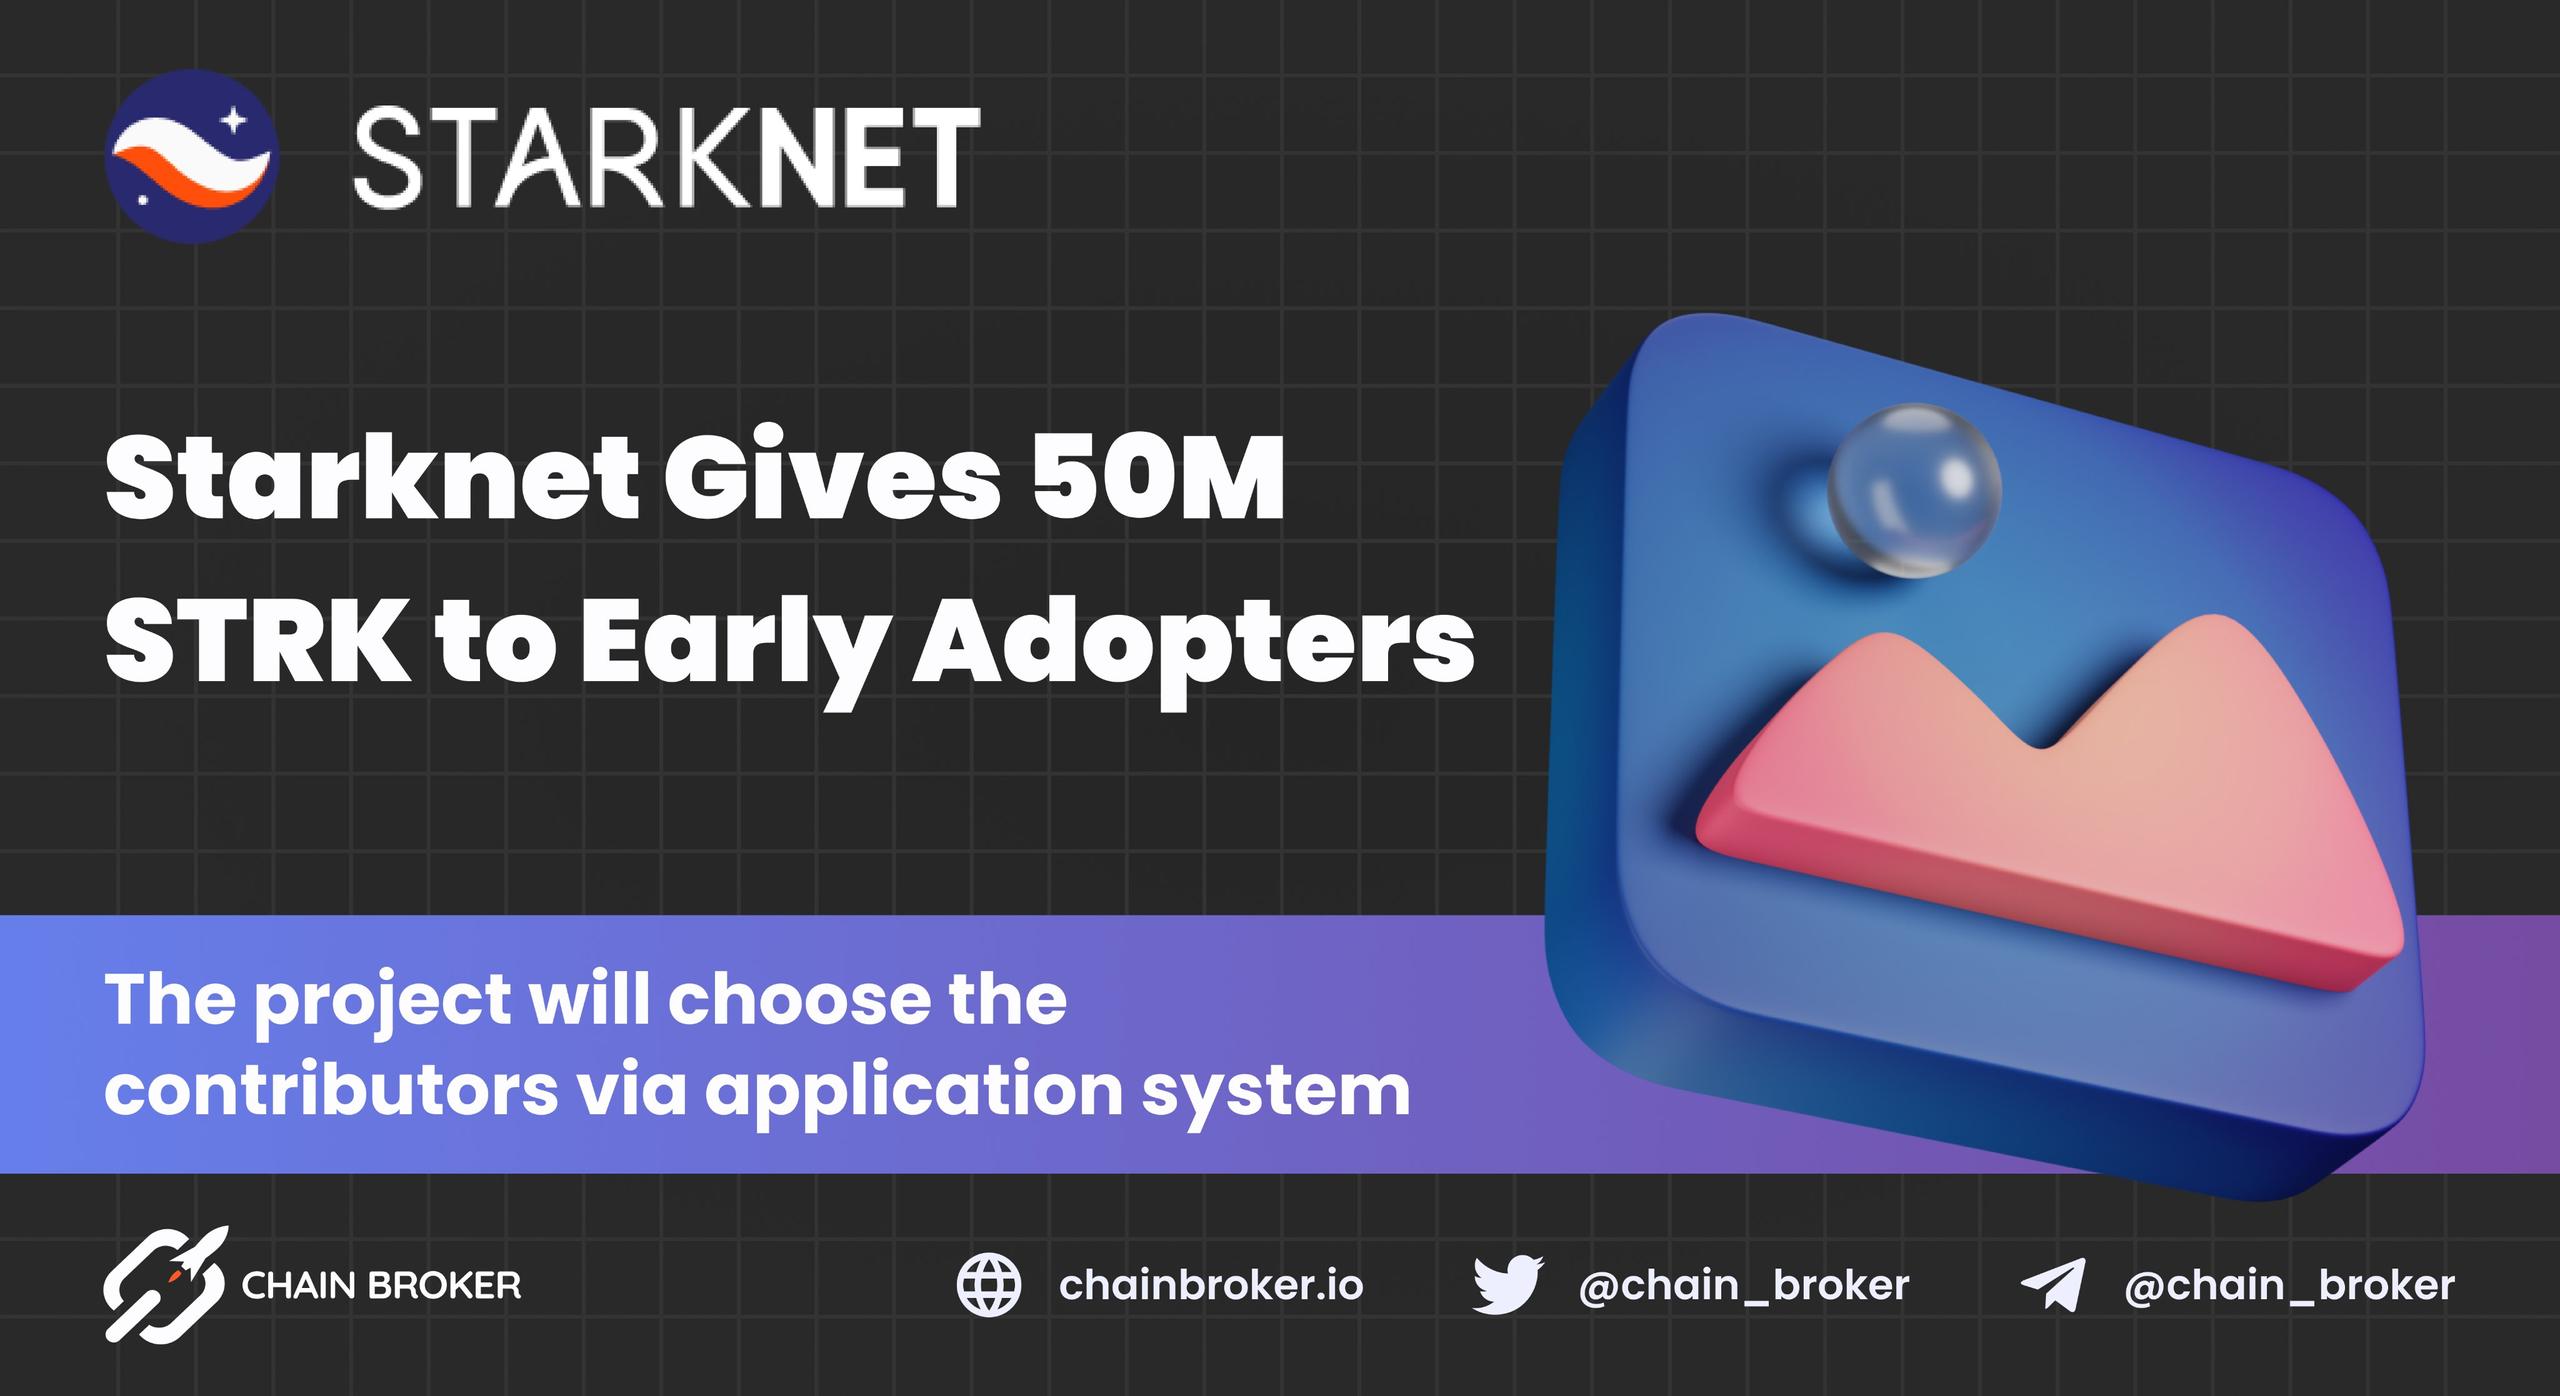 Starknet will distribute 50M STRK token among early adopters